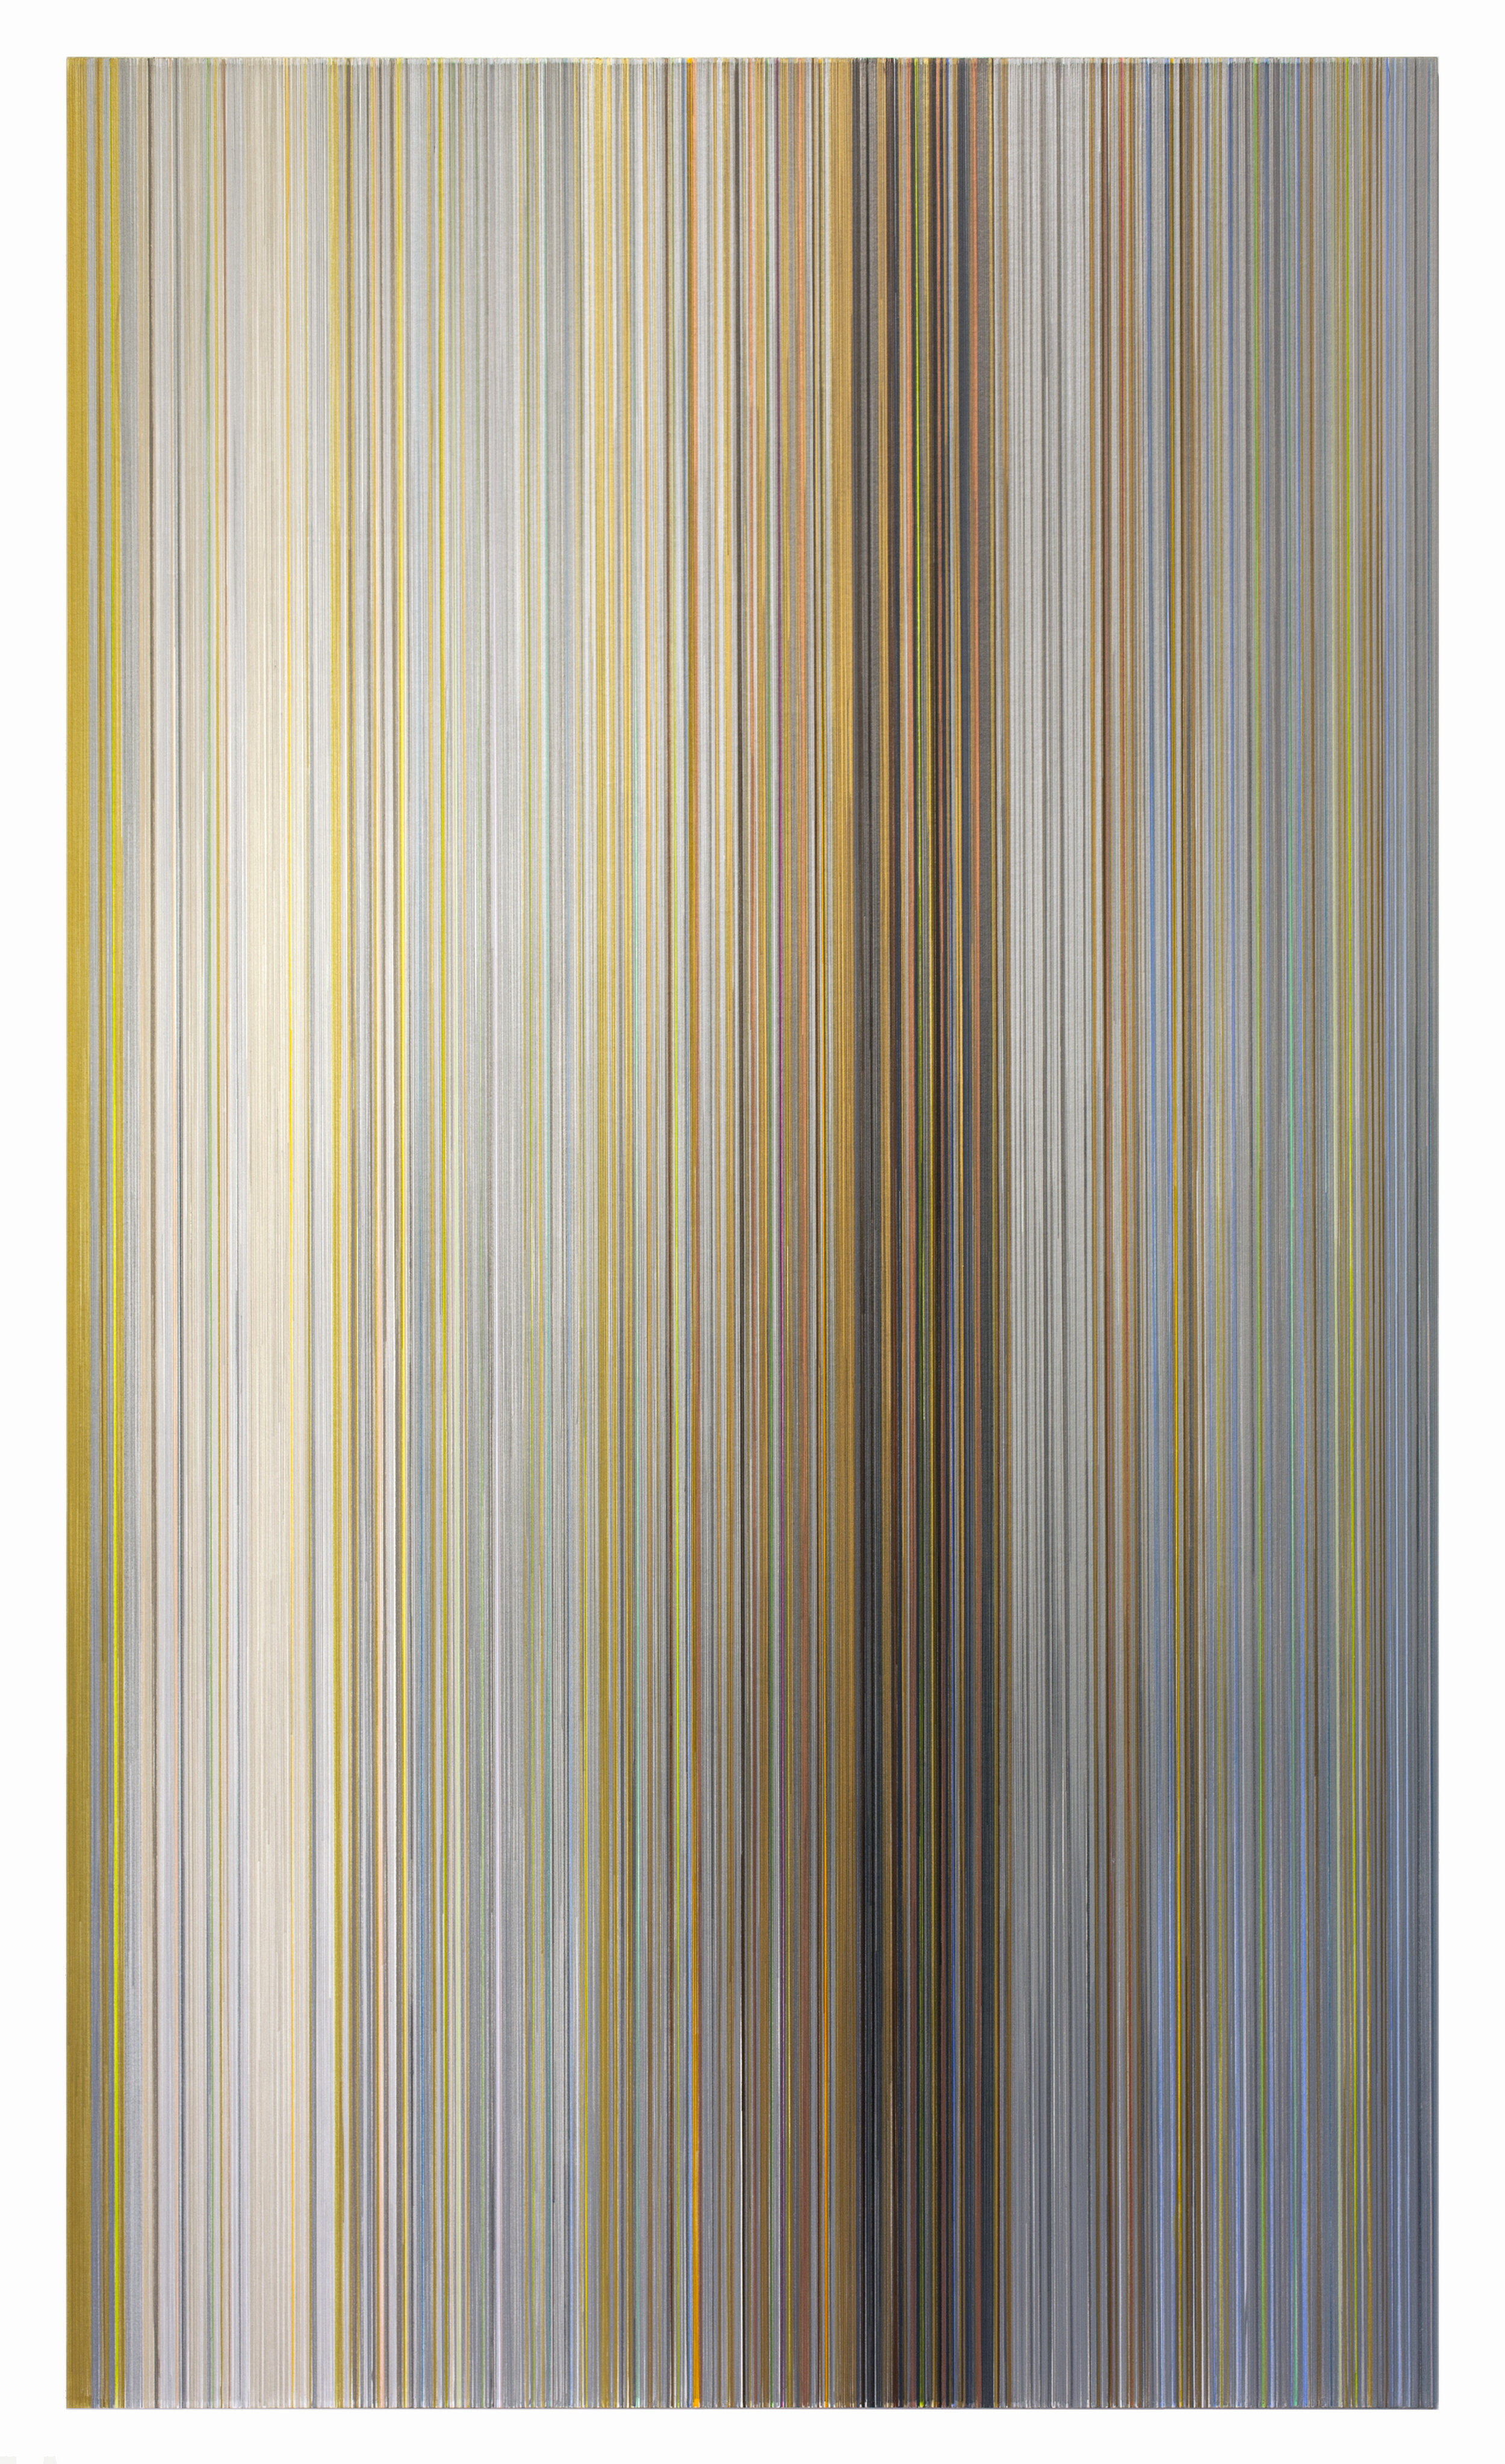    the small hours   2017 graphite and colored pencil on mat board 59 by 102 inches title from poem by Alice Oswald “Vertigo” from Falling Awake, (2016) W.W. Norton &amp; Company Collection of the Chicago Exchange   